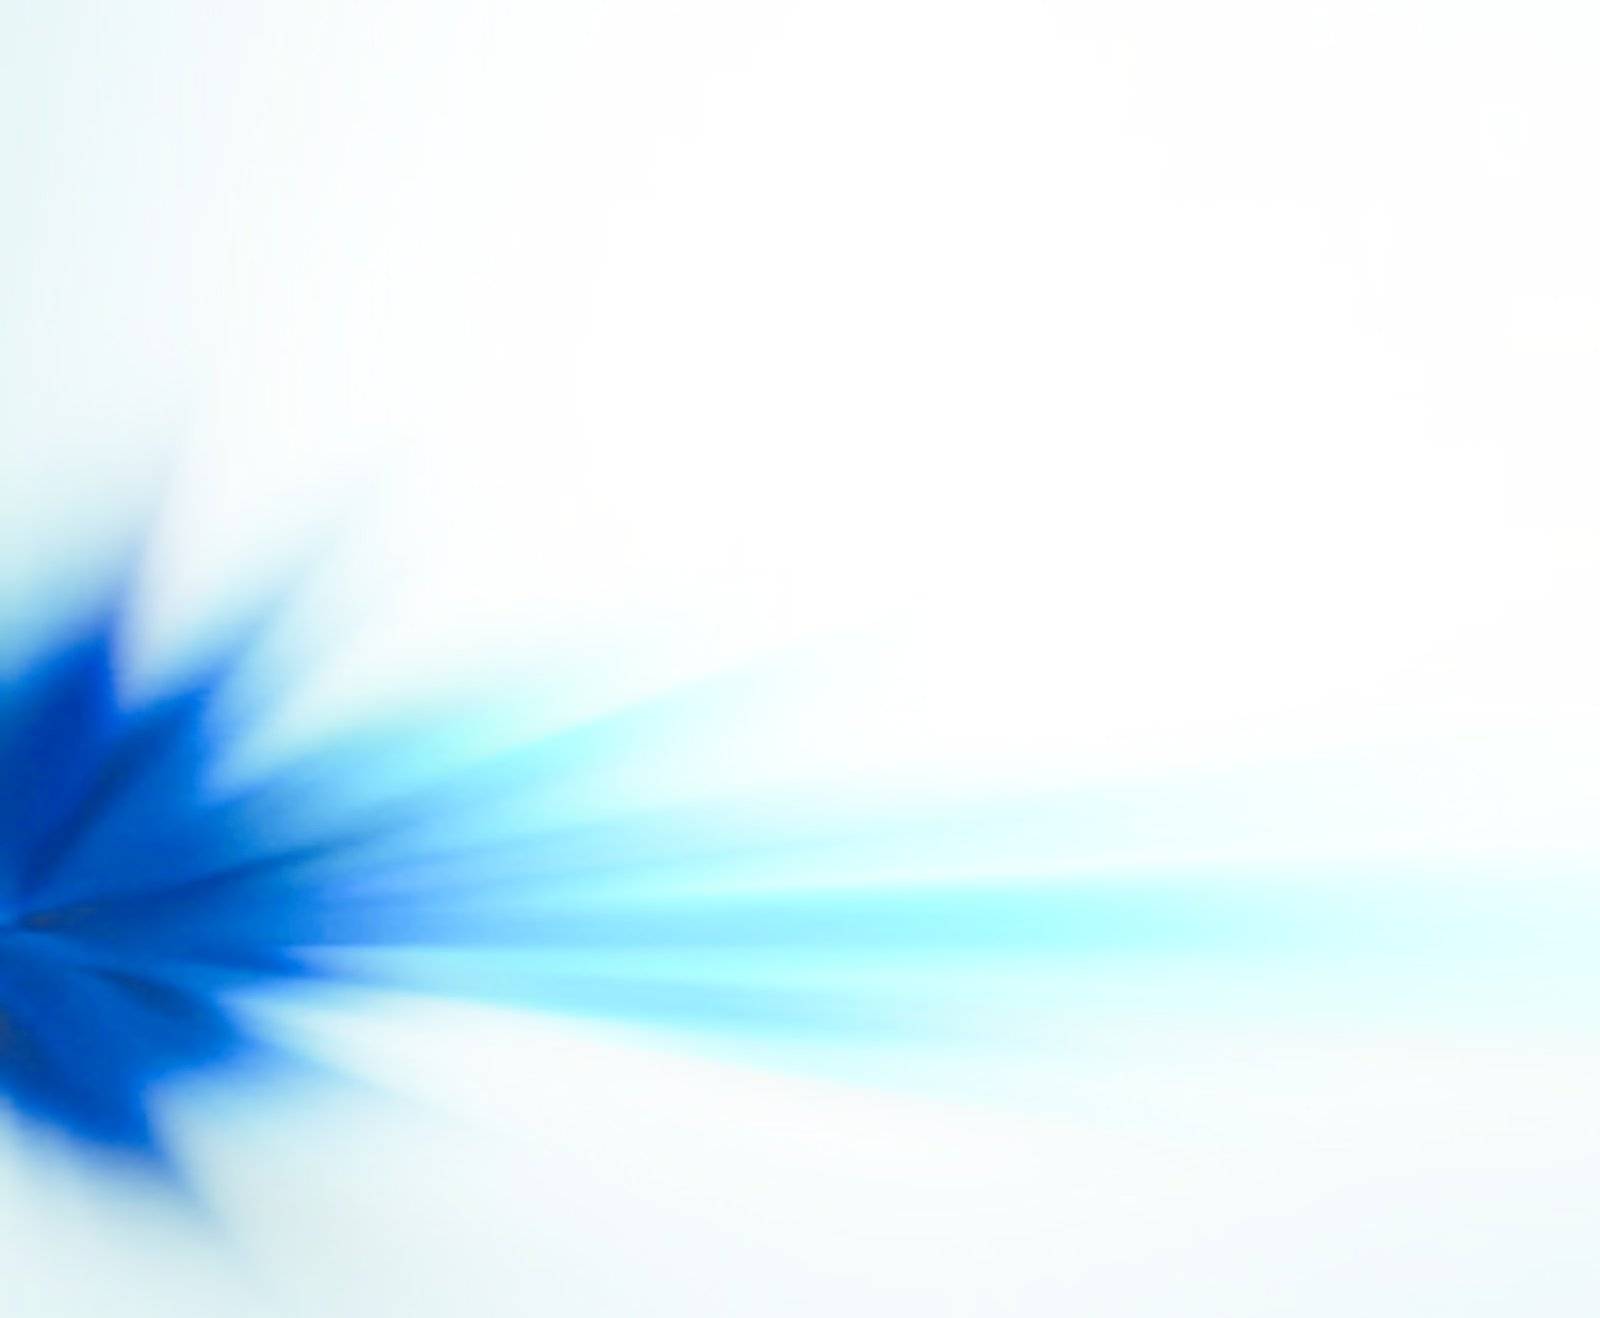 Abstract editable vector background of a blue motion blur made using a gradient mesh